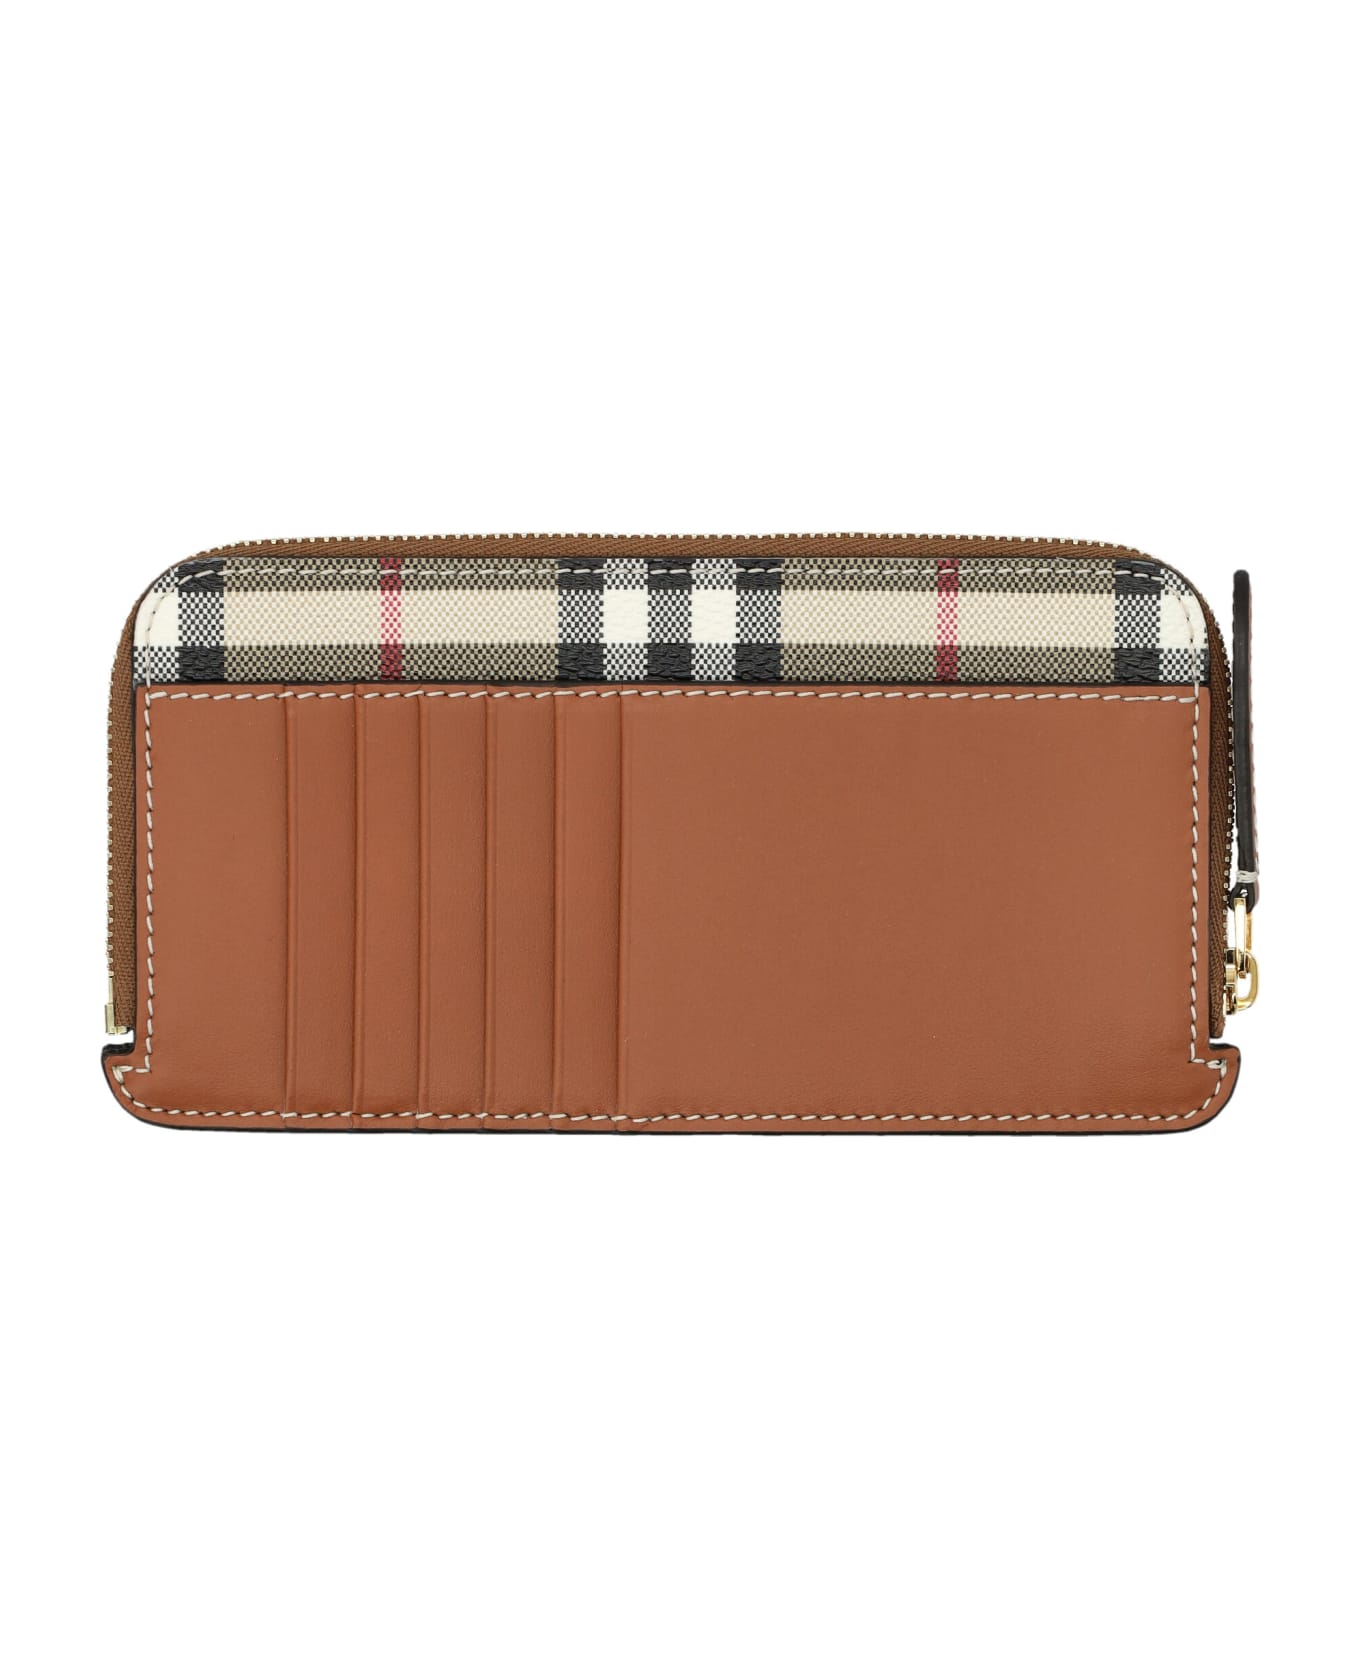 Burberry London Long Somerset Wallet - ARCHIVE BEIGE CHECK